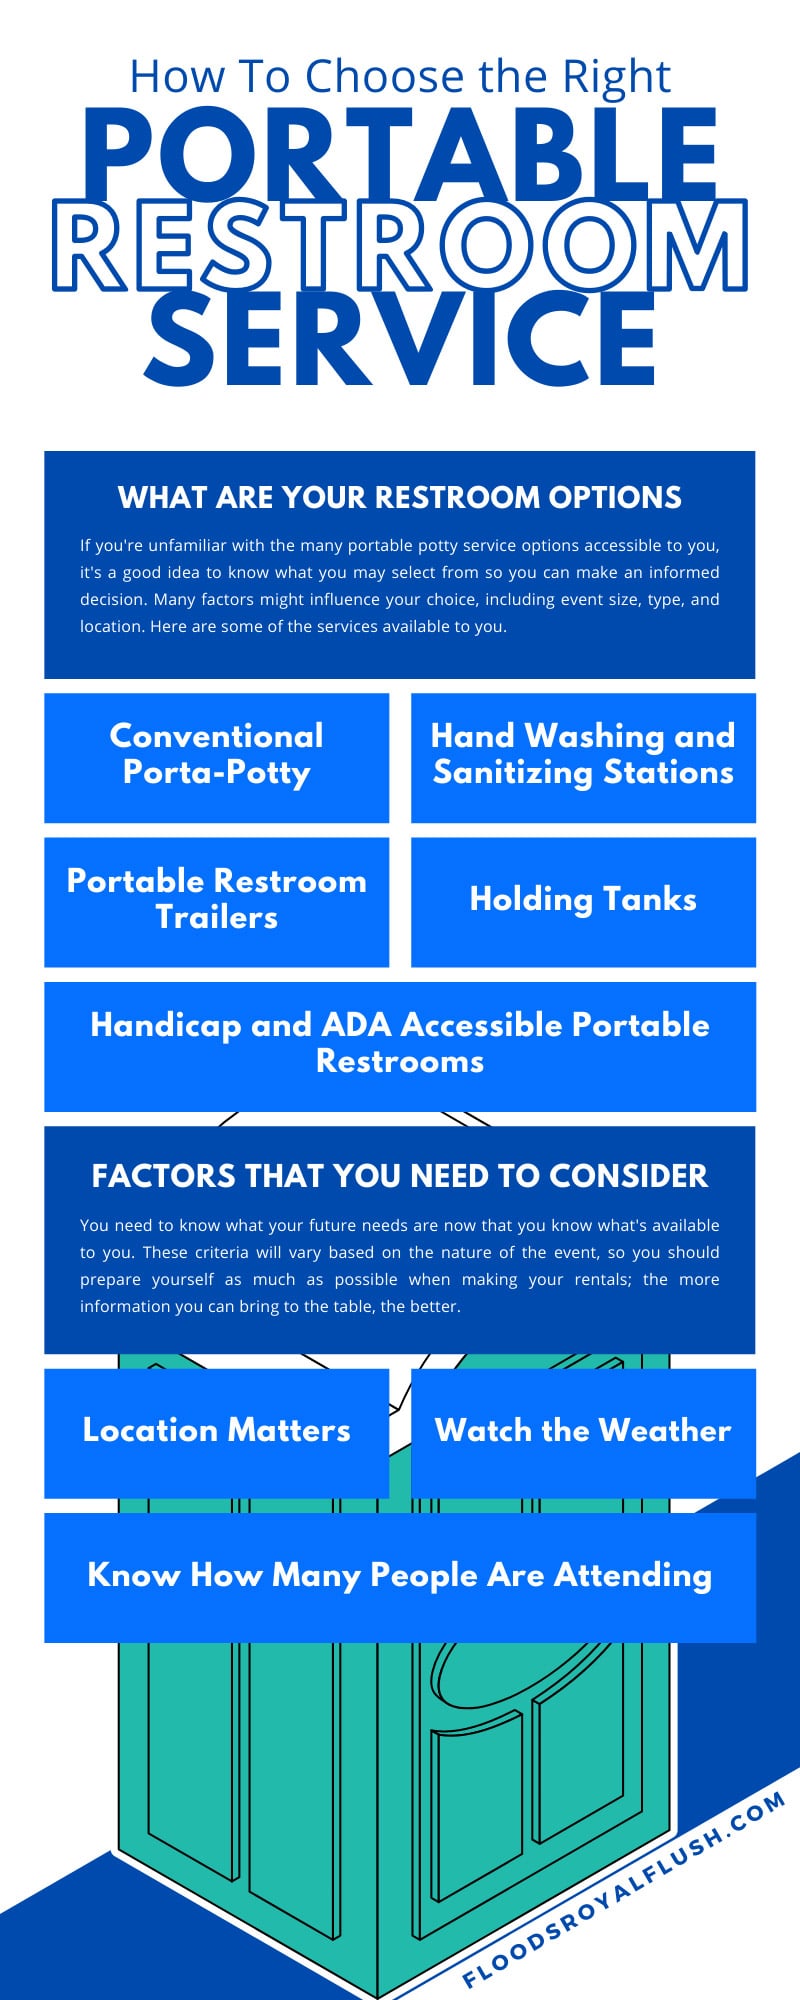 How To Choose the Right Portable Restroom Service